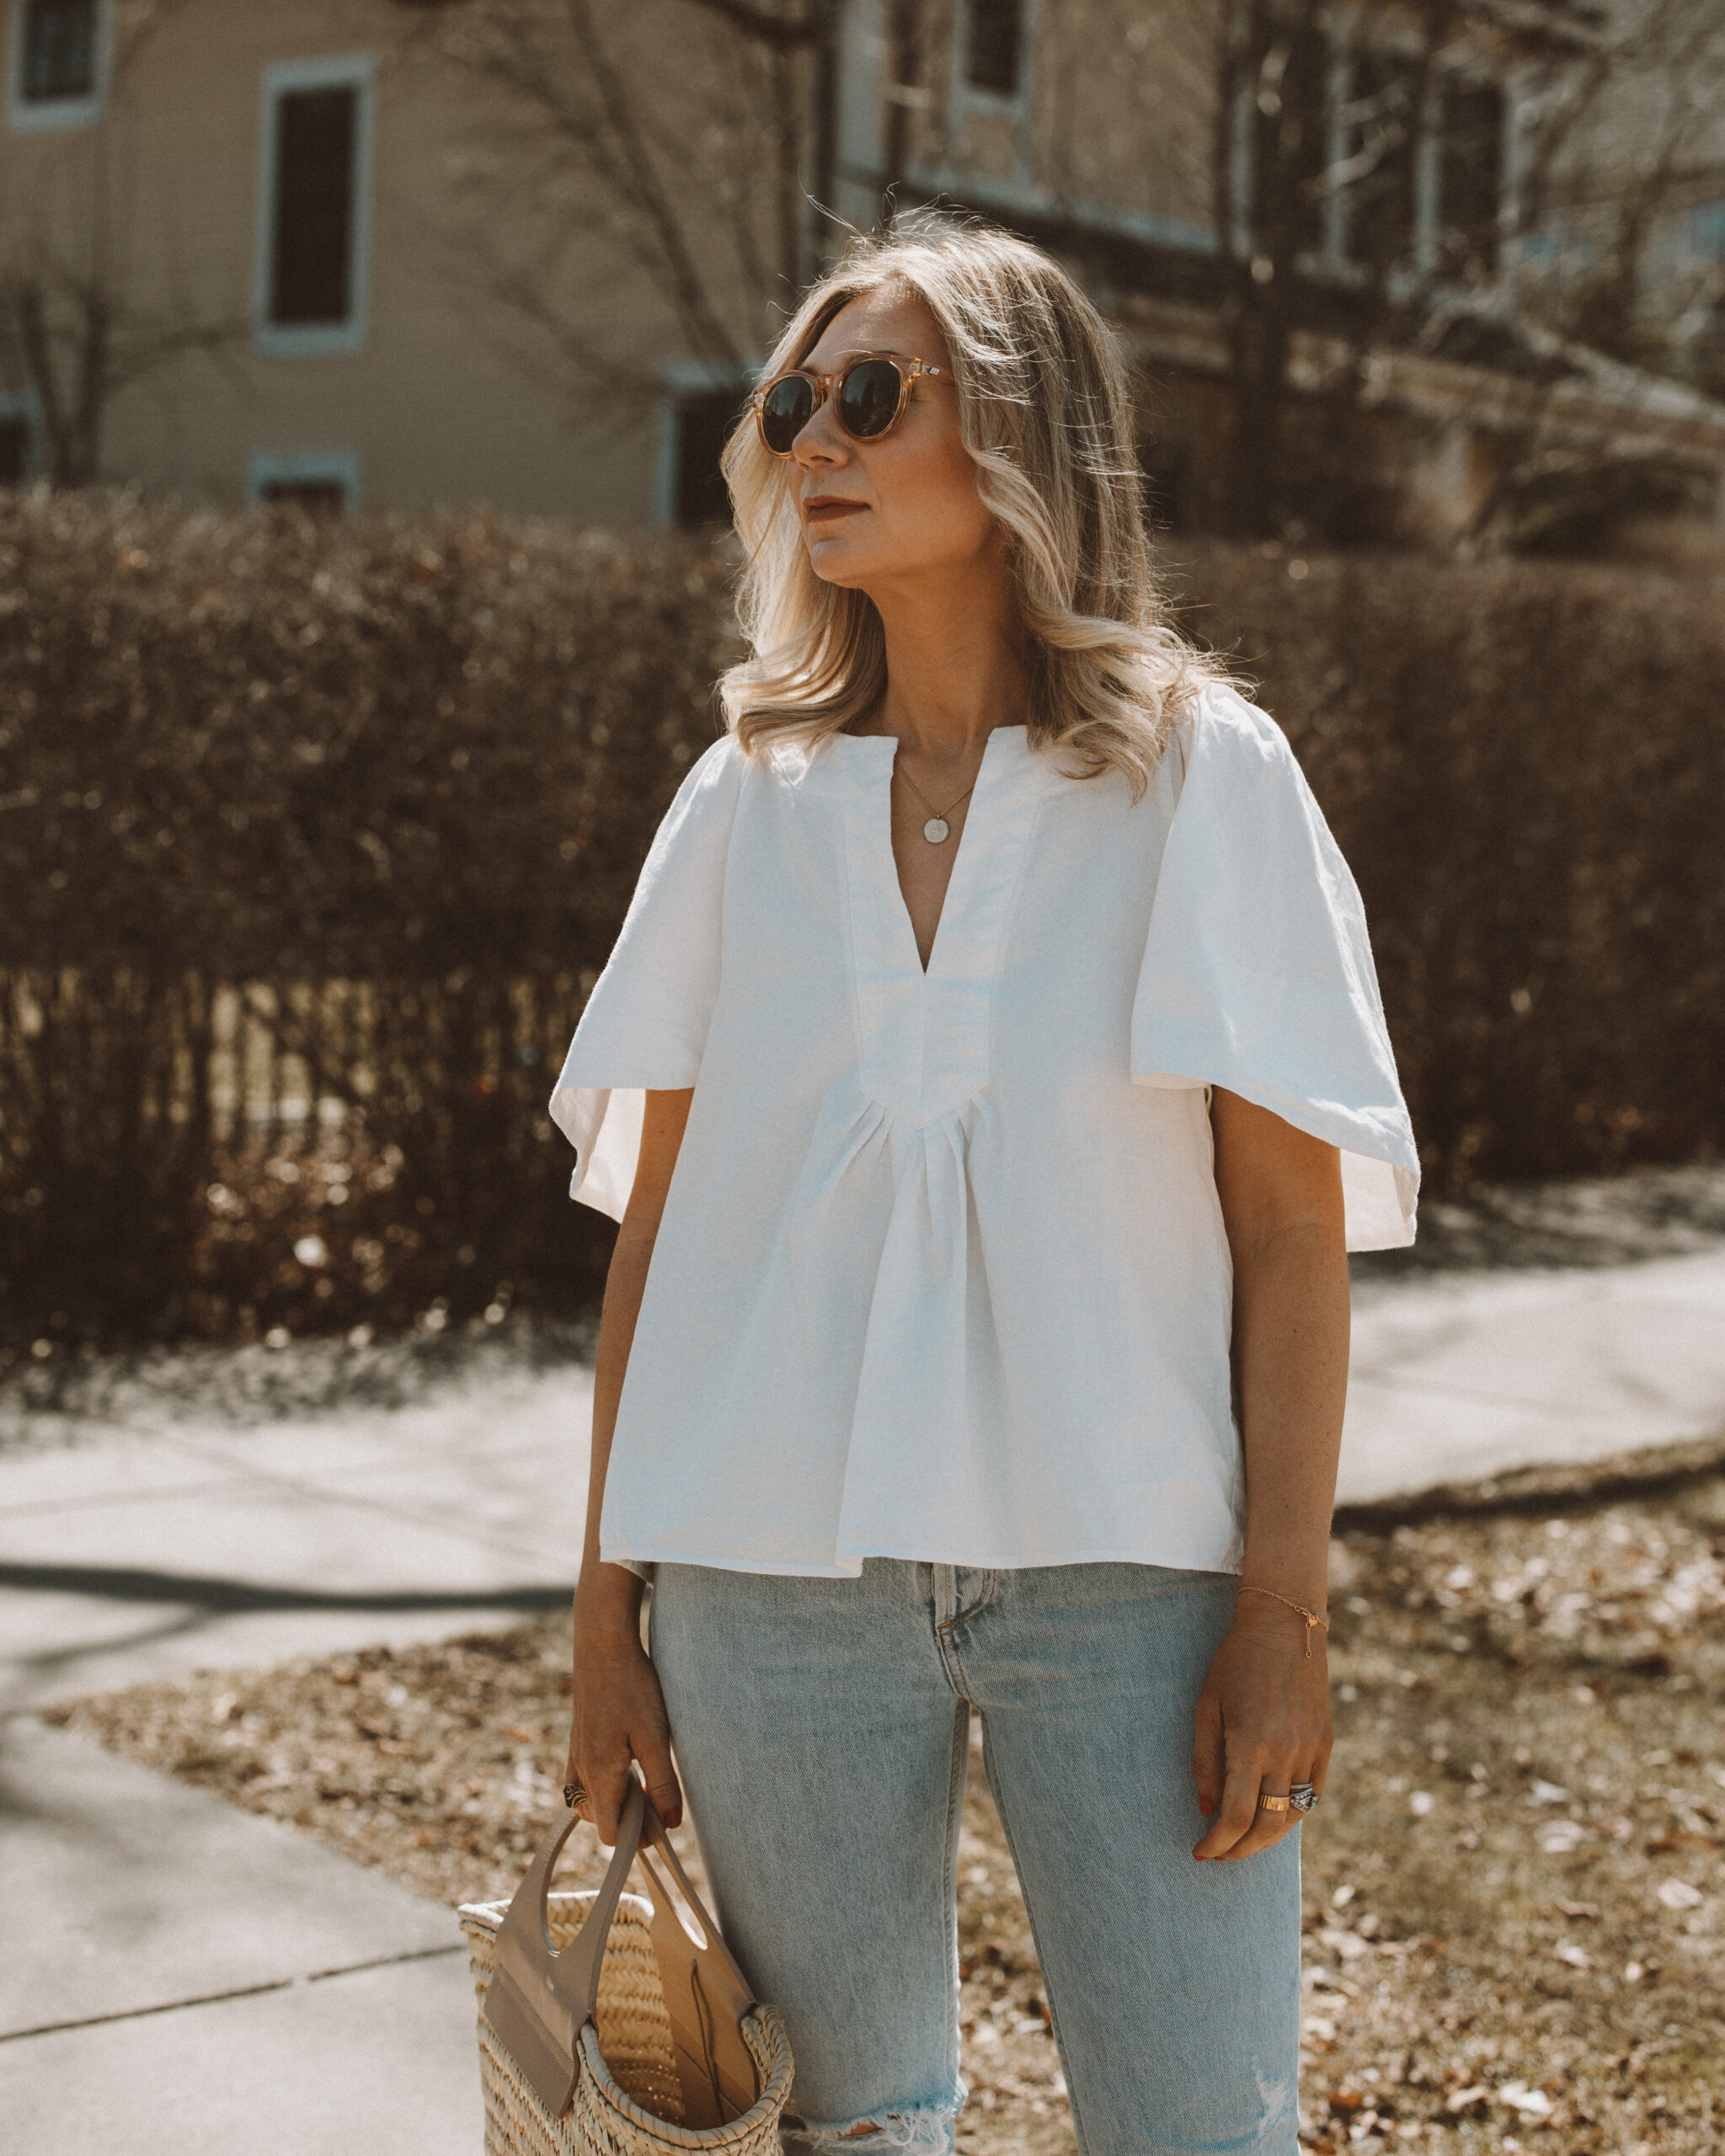 Karin Emily wears a white flutter sleeve blouse with a pair of light blue wash riley jeans from Agolde and clear framed sunglasses